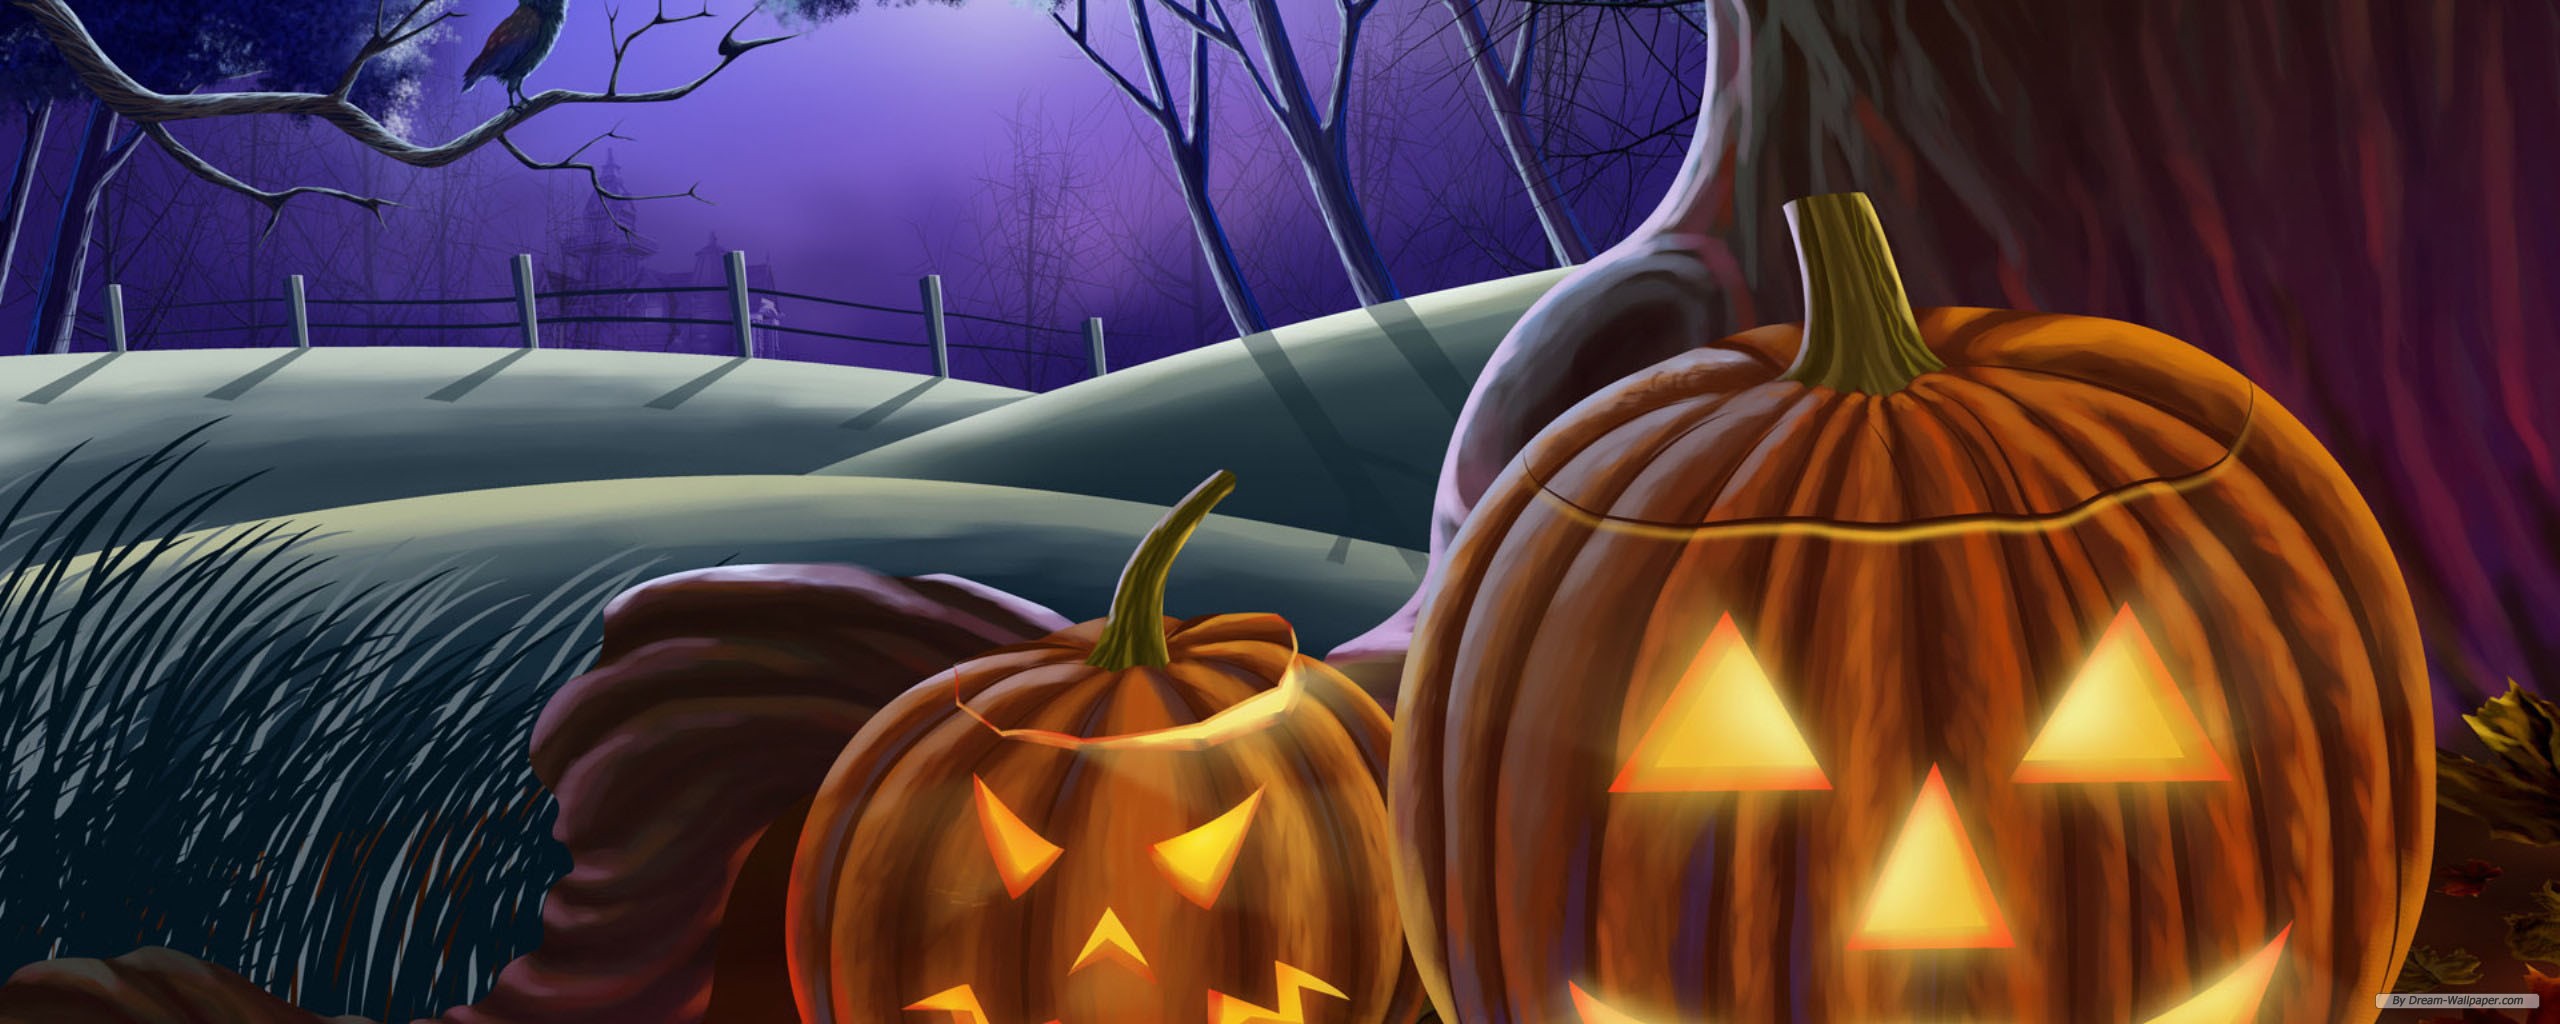 Image Of Holiday Wallpaper Halloween Episode Dual Screen